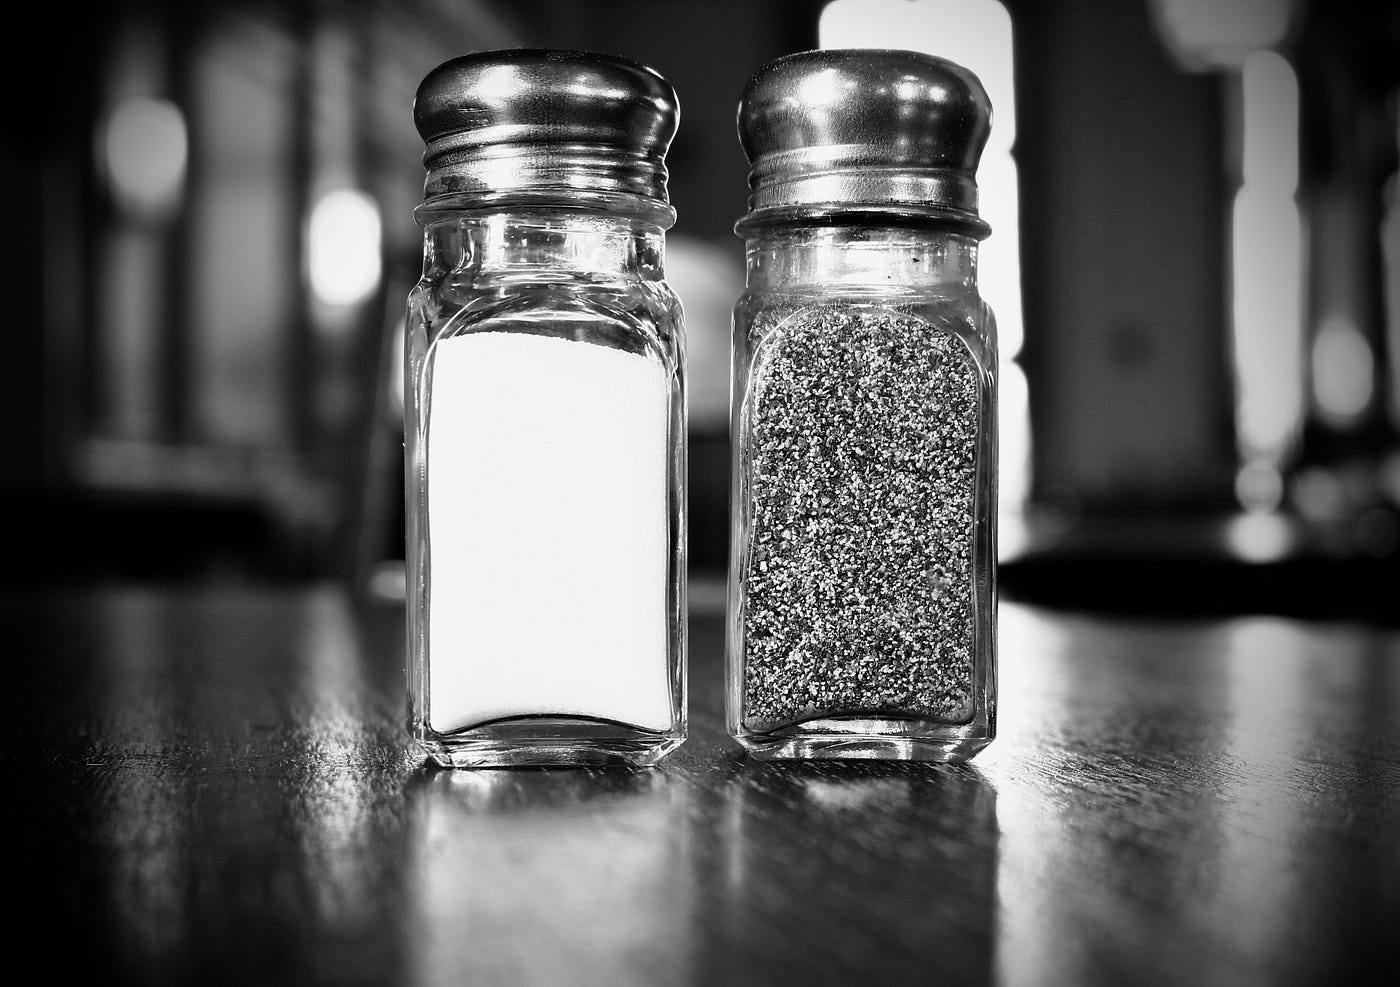 The Salt Shaker Theory of Leadership, by Paul Stansik